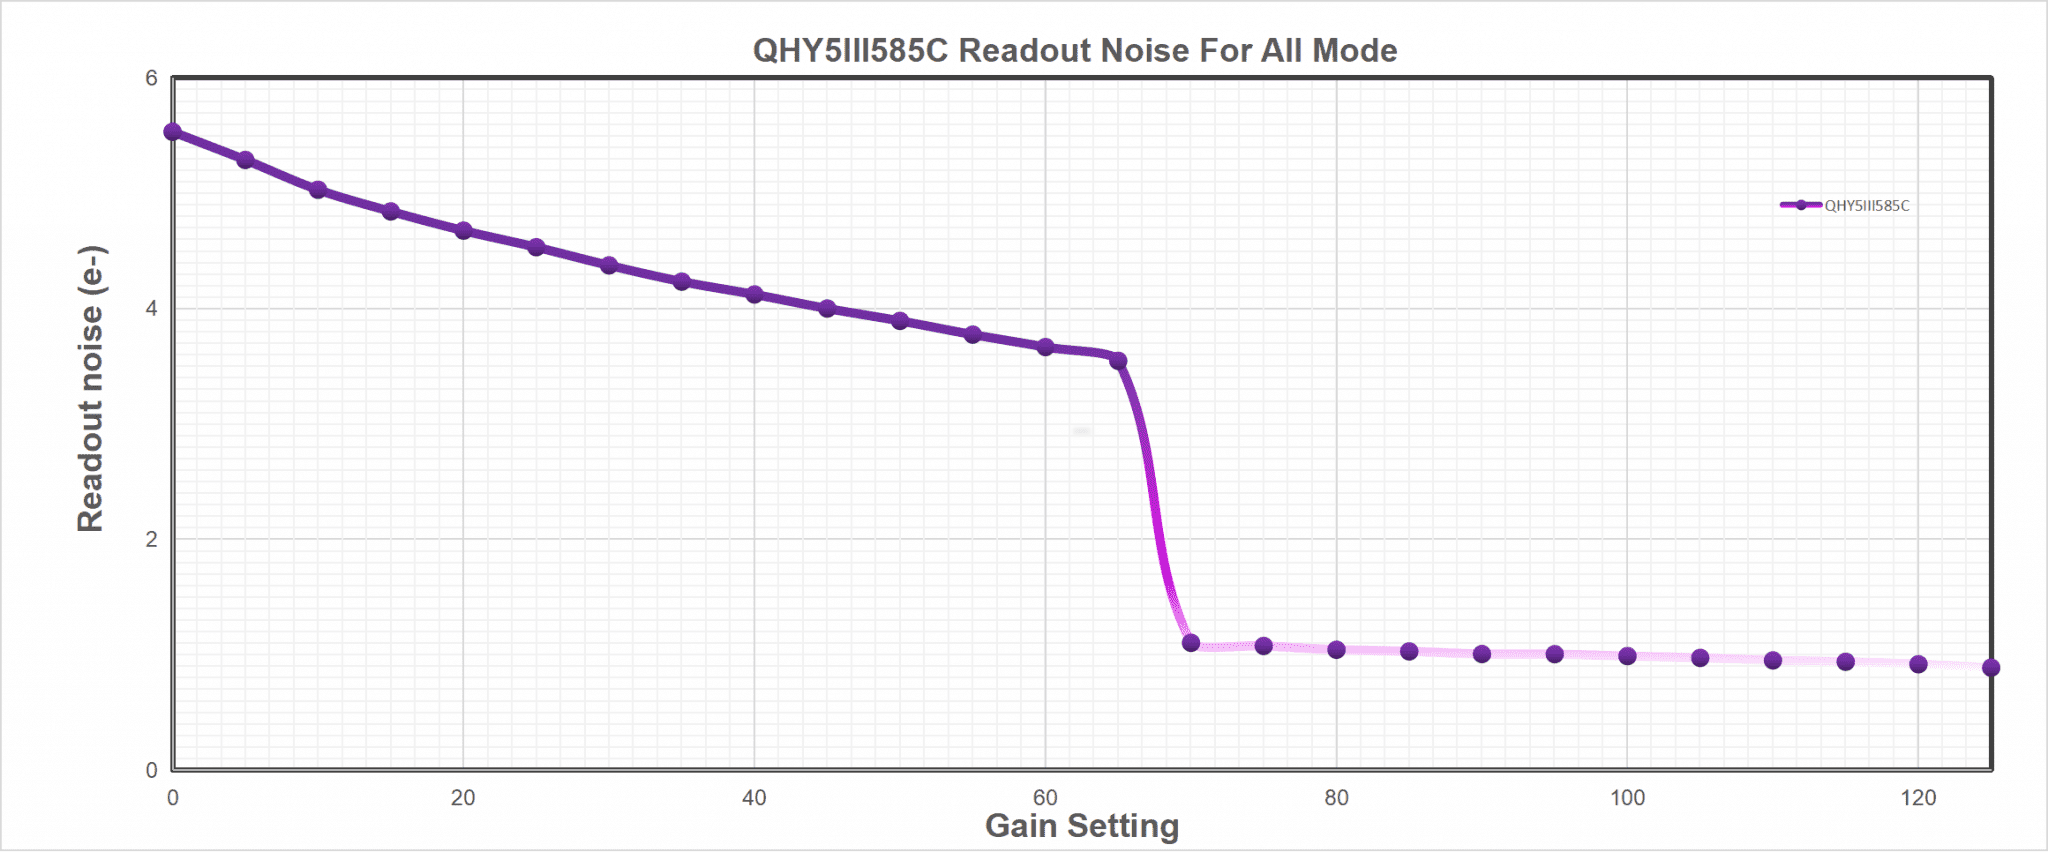 QHY 5-III-585C Readout Noise